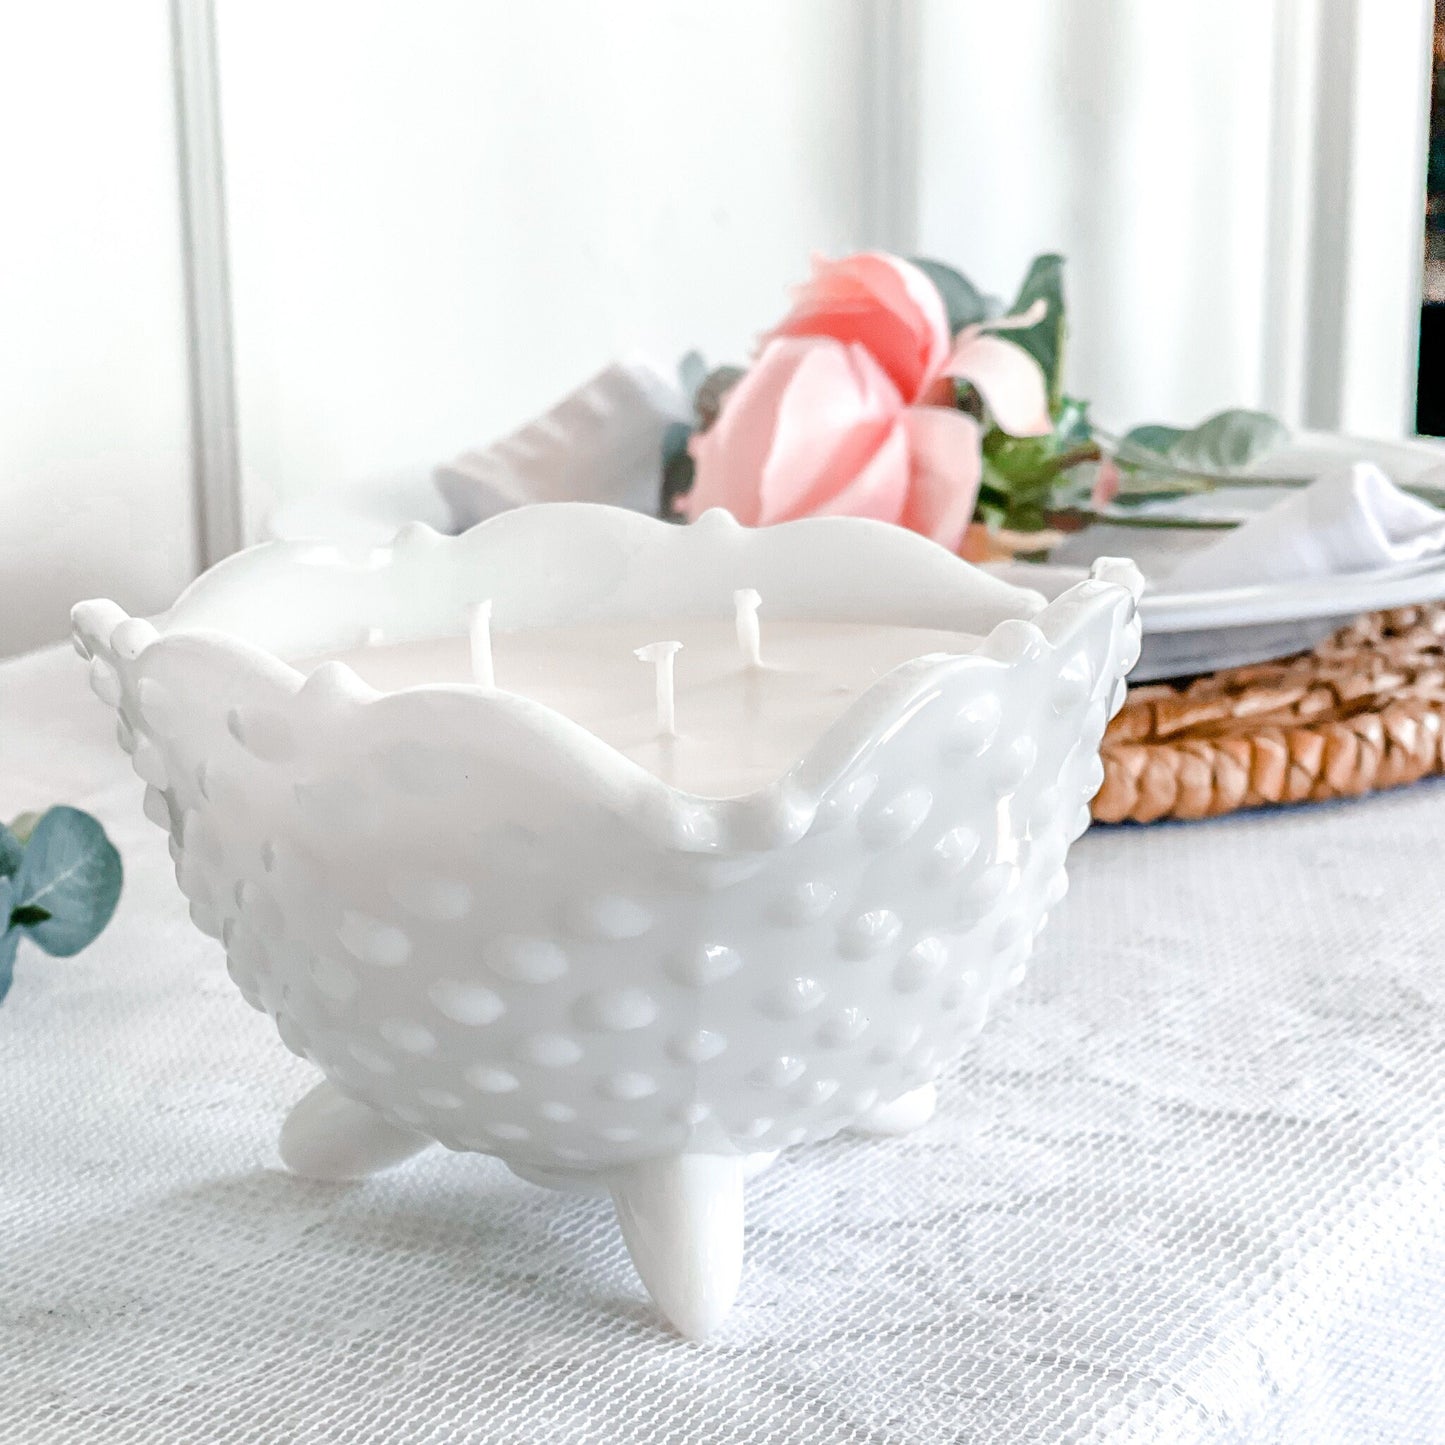 Scented Candle in Vintage Milk Glass Bowl